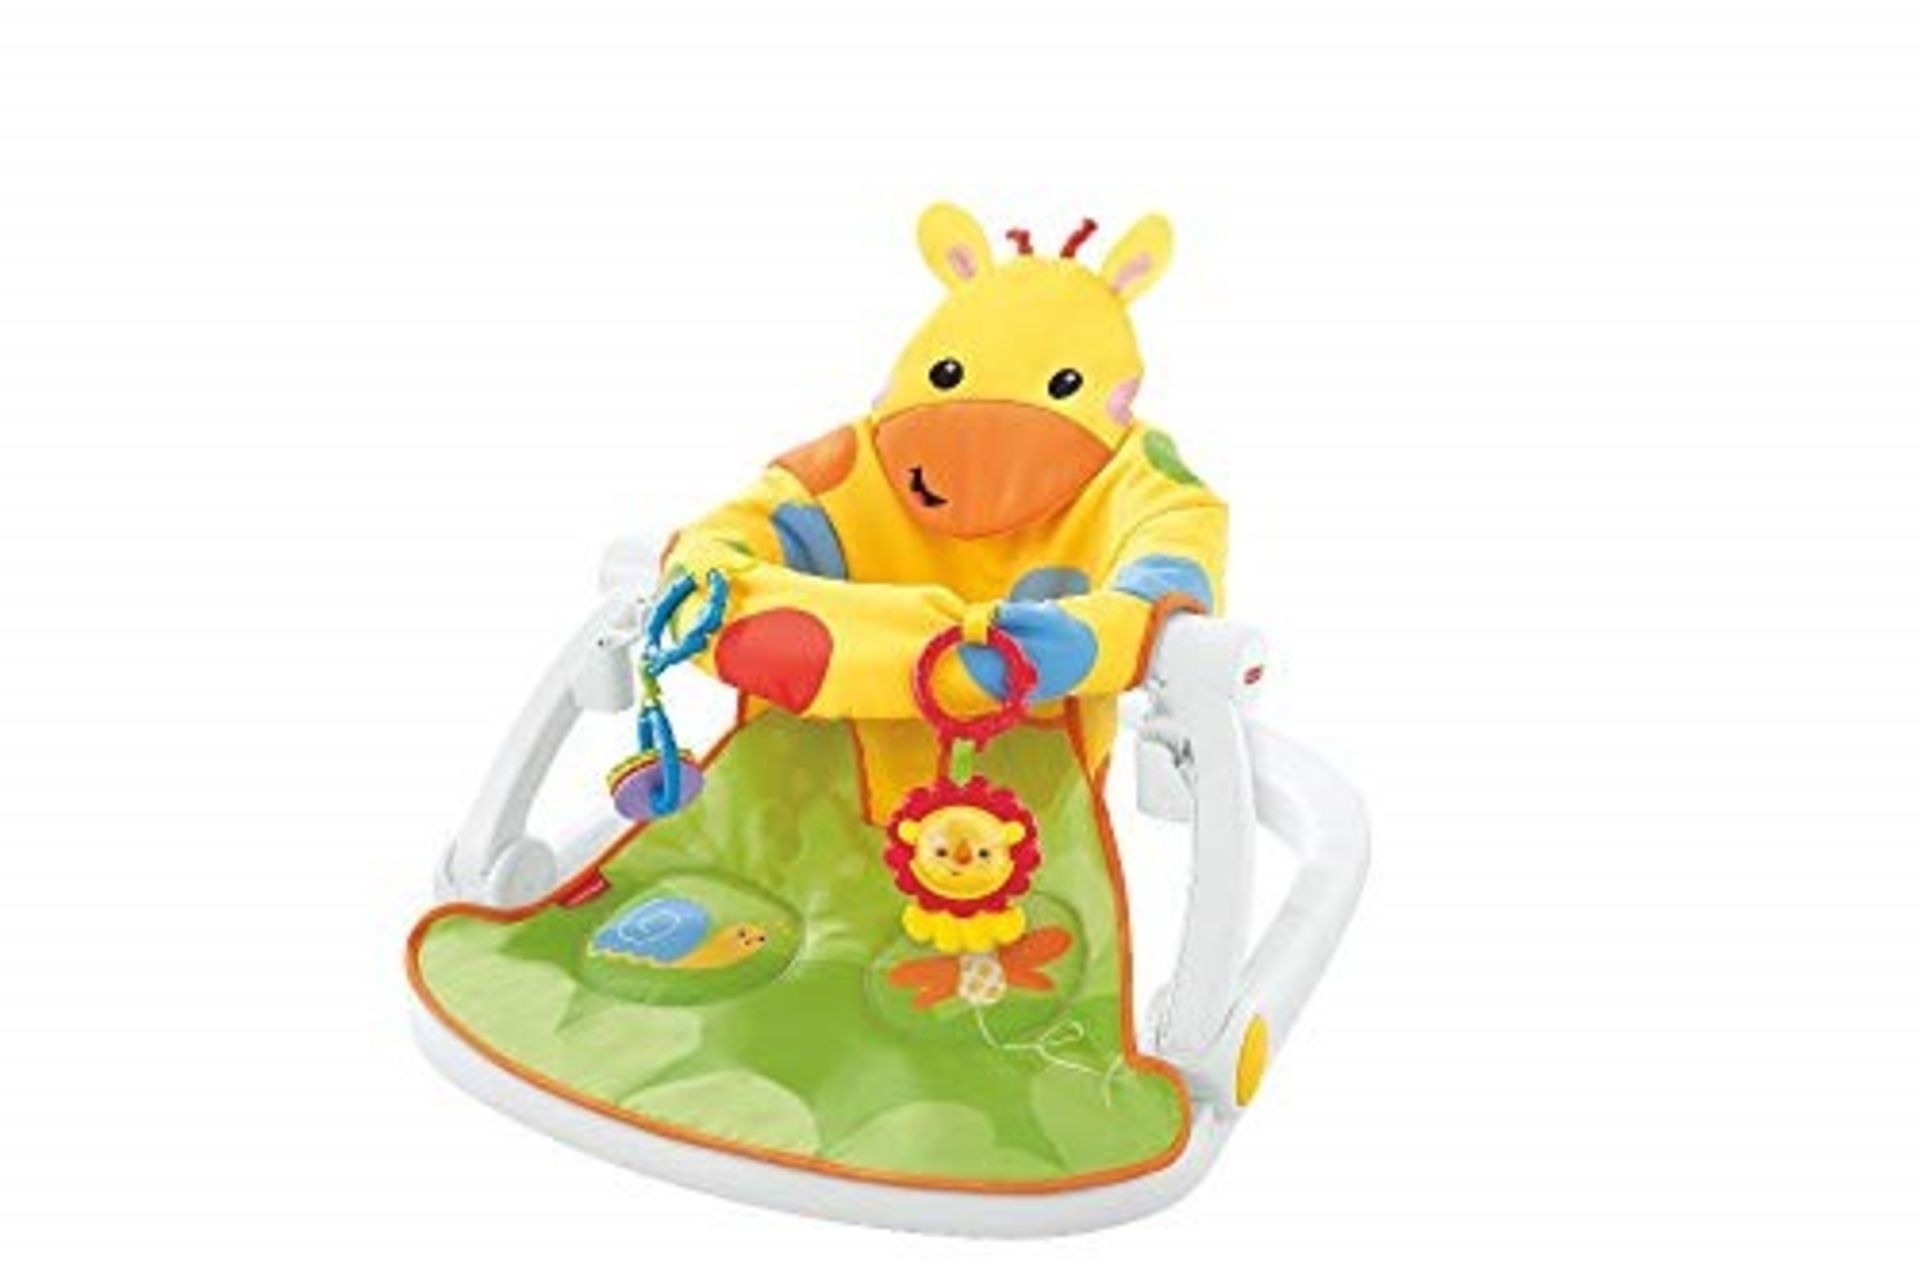 Fisher-Price DJD81 Giraffe Sit-Me-Up Floor Seat, Portable Baby Chair or Seat with Remo